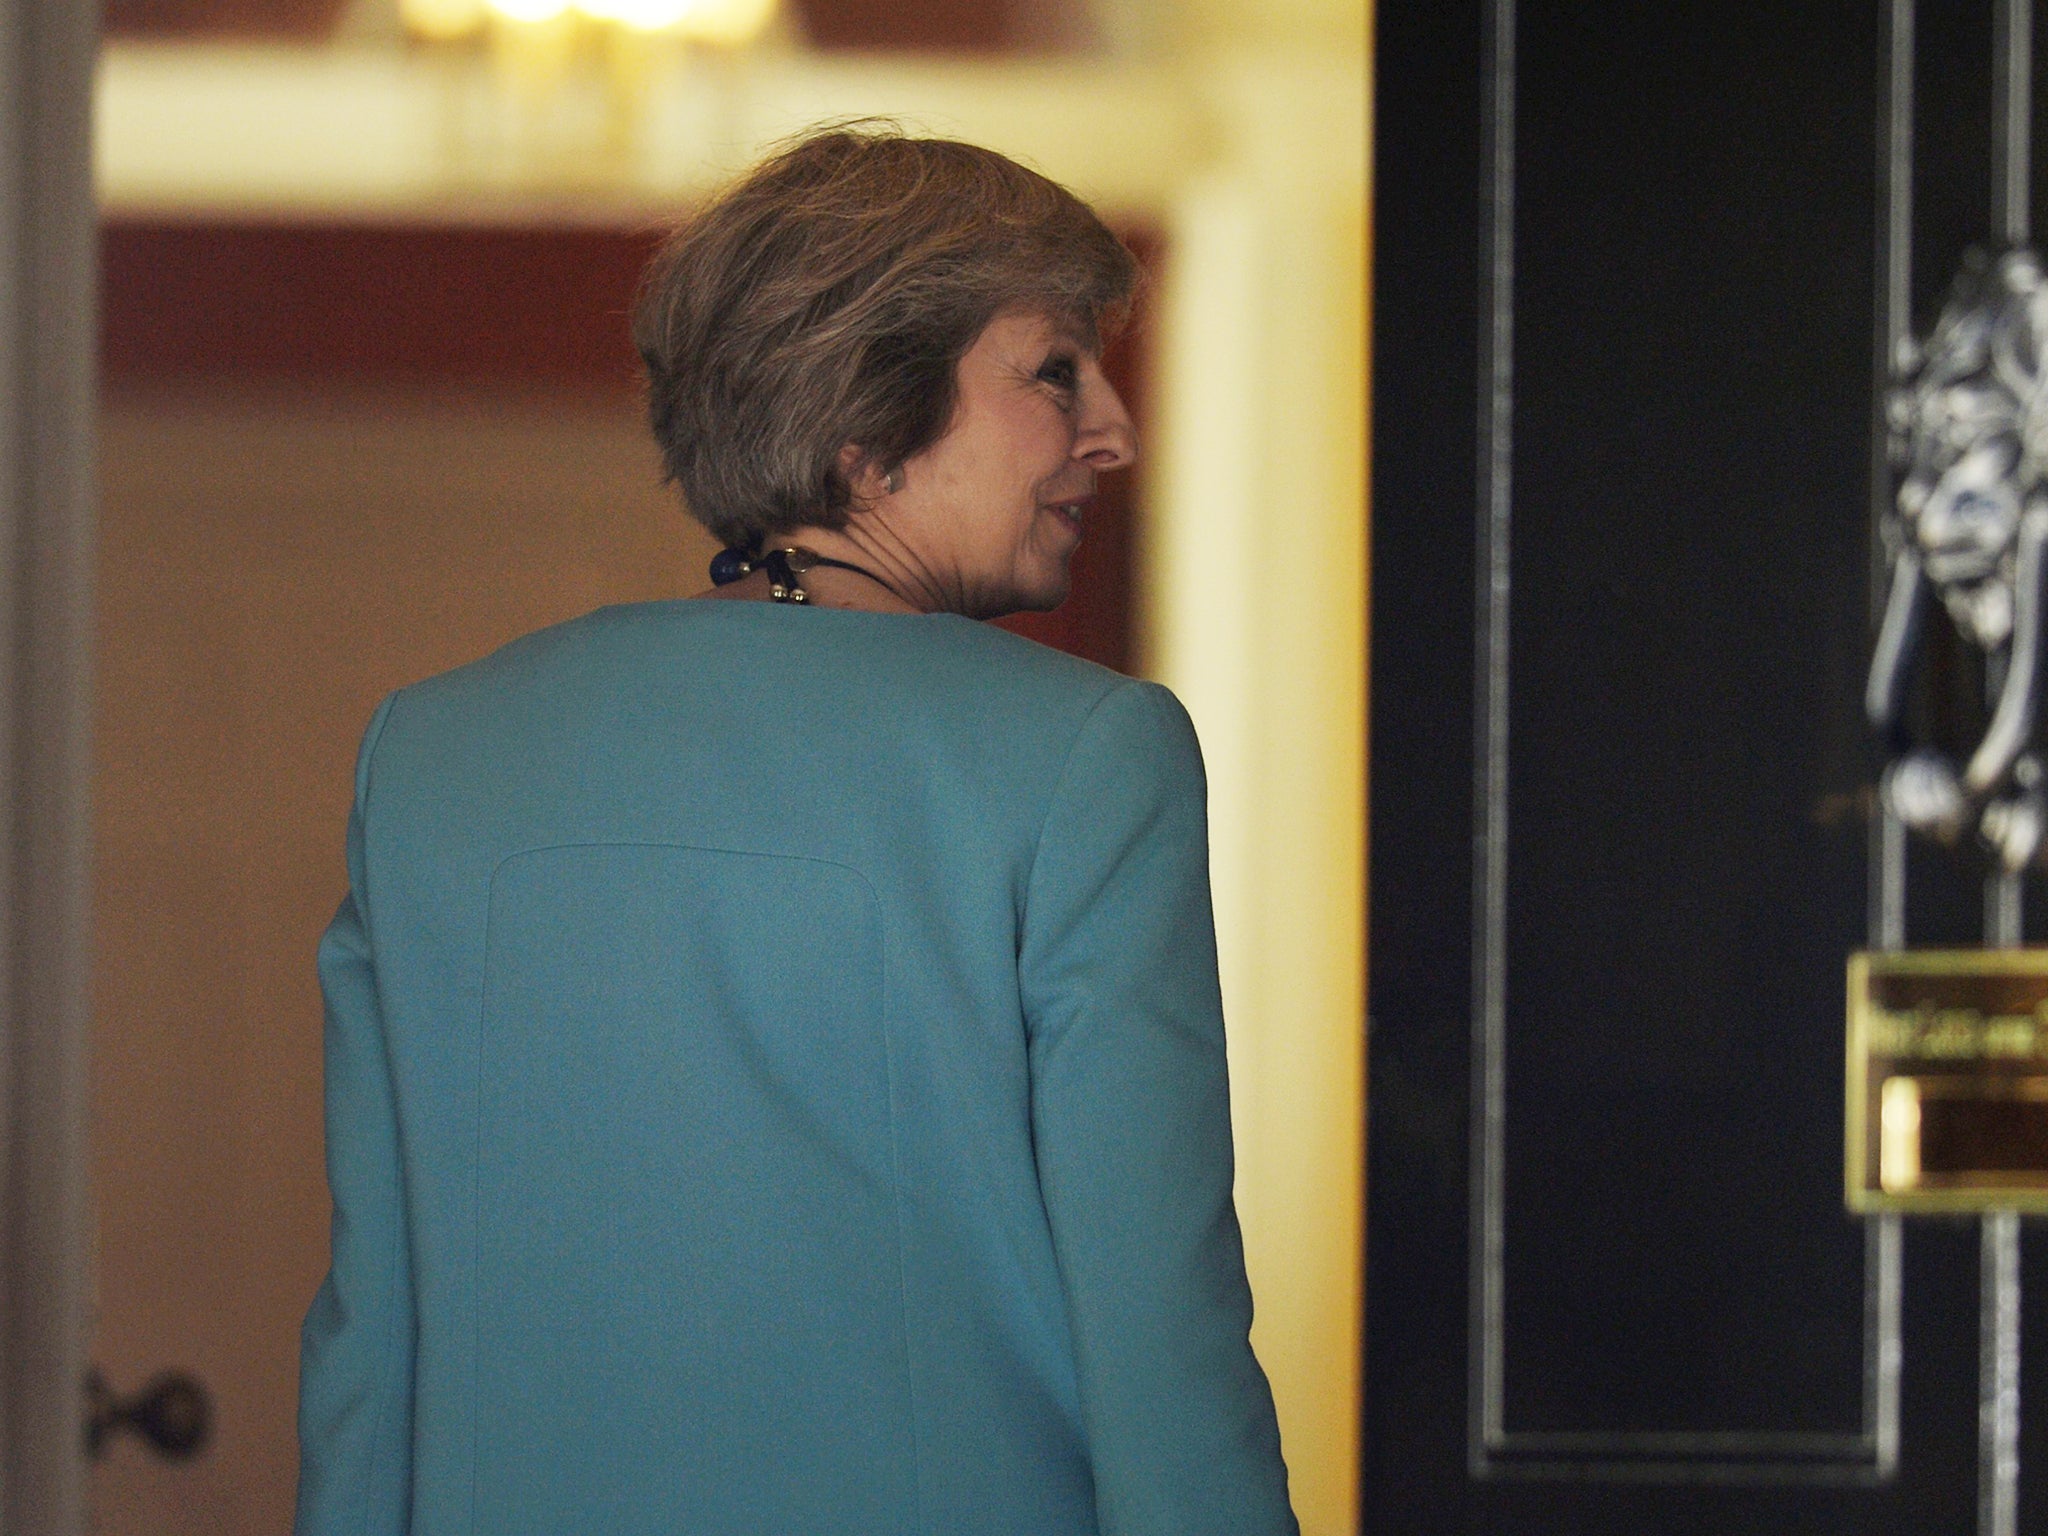 May told Tory MPs at a leadership hustings that she would restore proper cabinet government